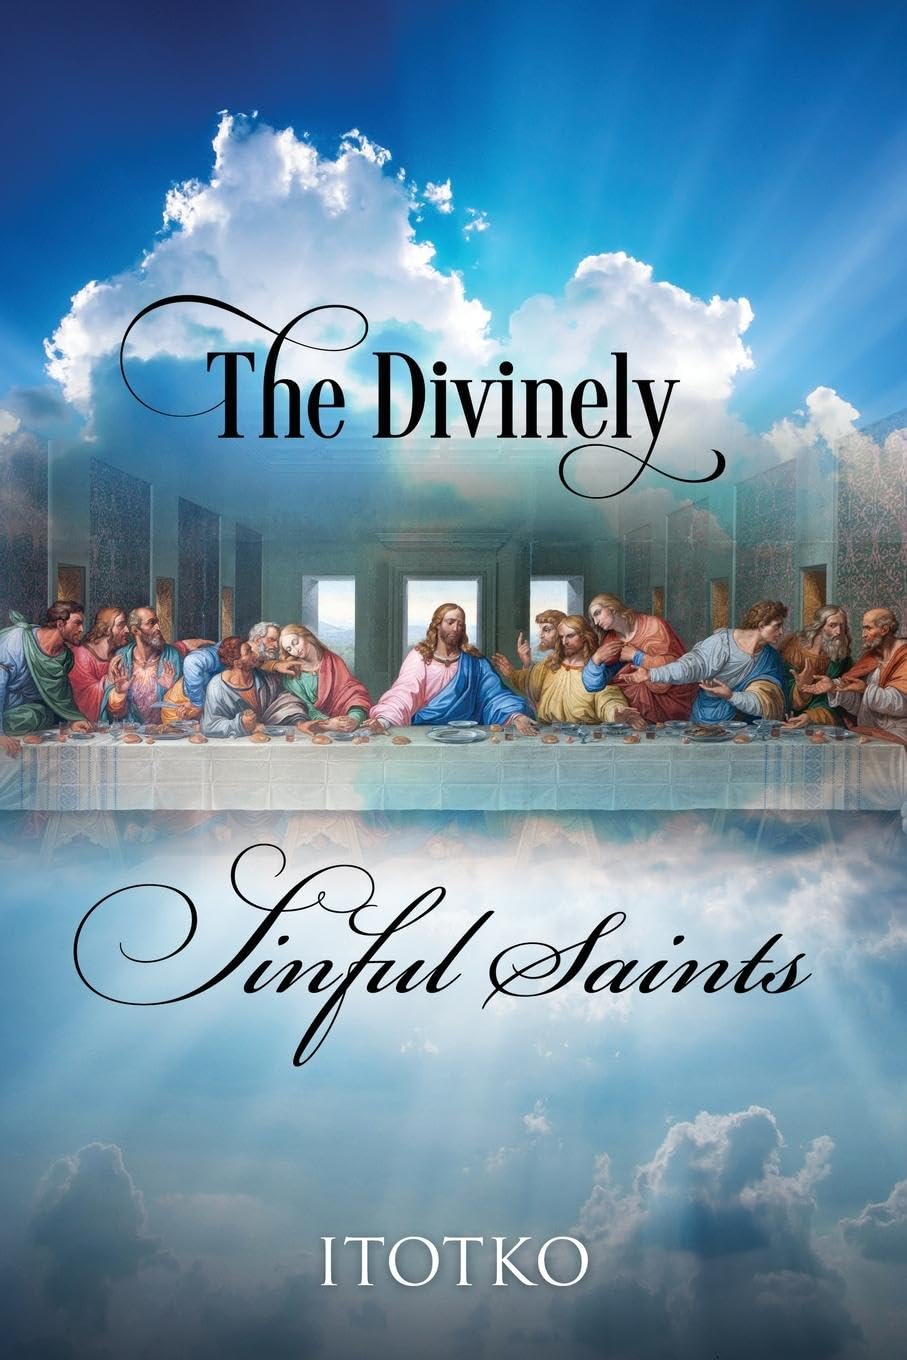 The Divinely Sinful Saints by ITOTKO